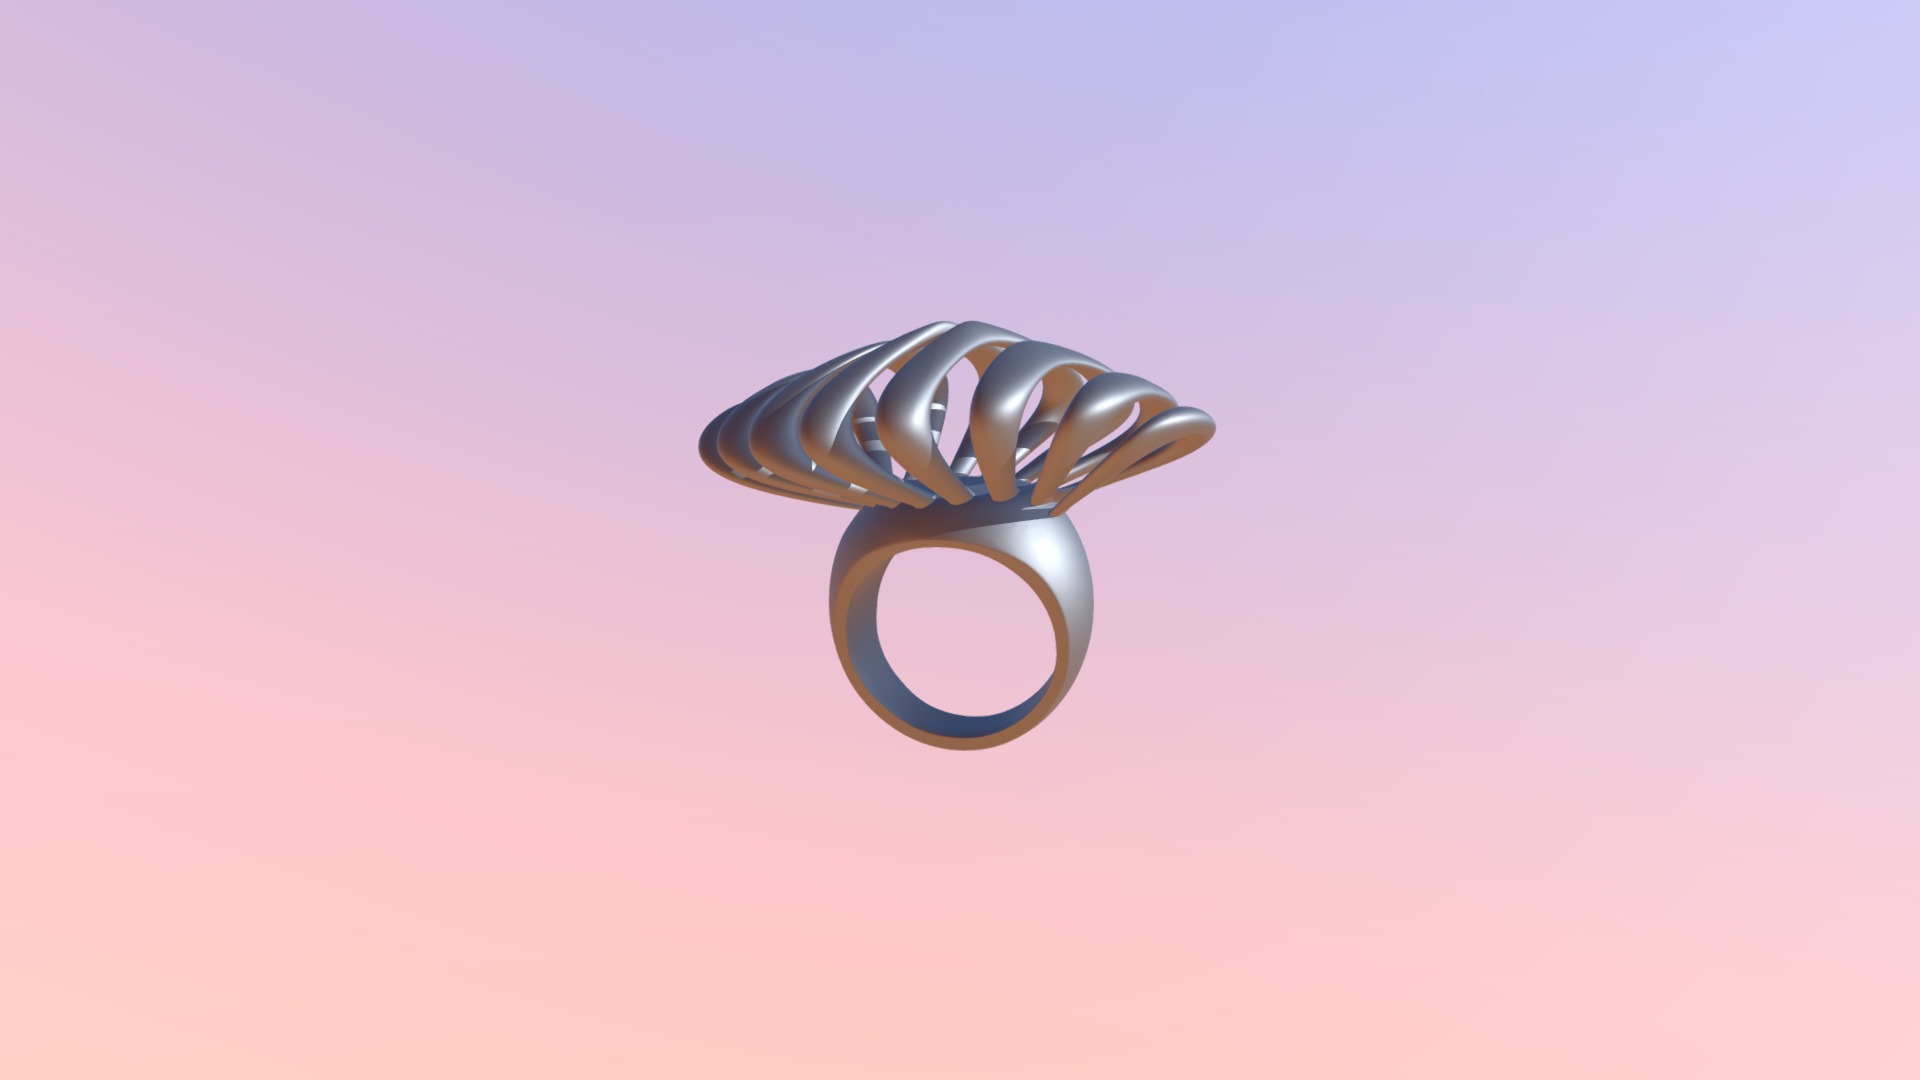 3D model Ring One - This is a 3D model of the Ring One. The 3D model is about a ring on a pink background.